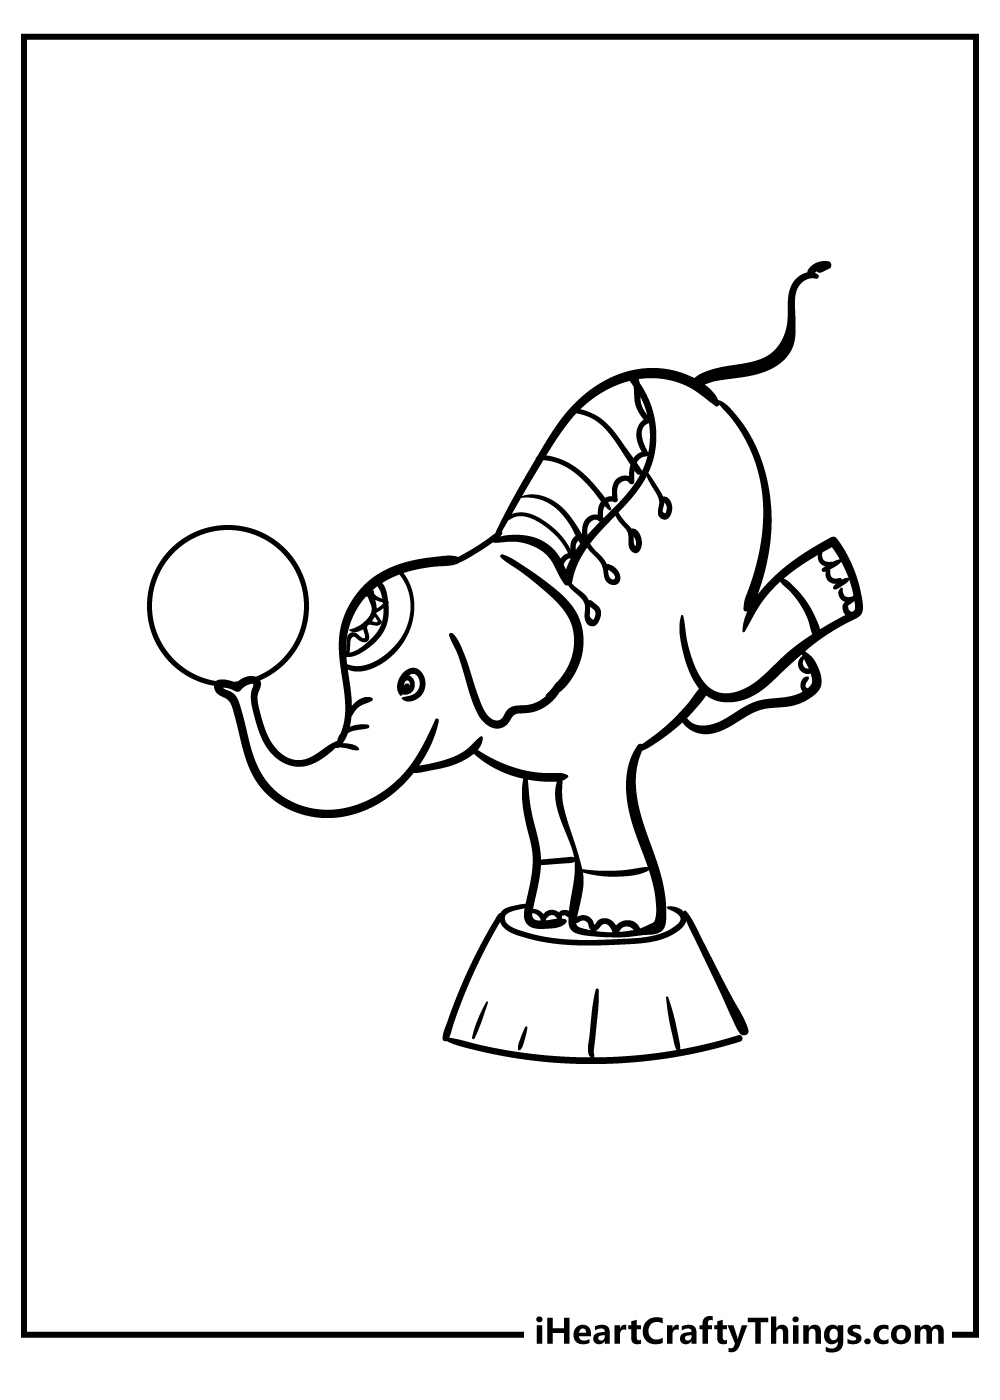 Circus Coloring Pages for preschoolers free printable